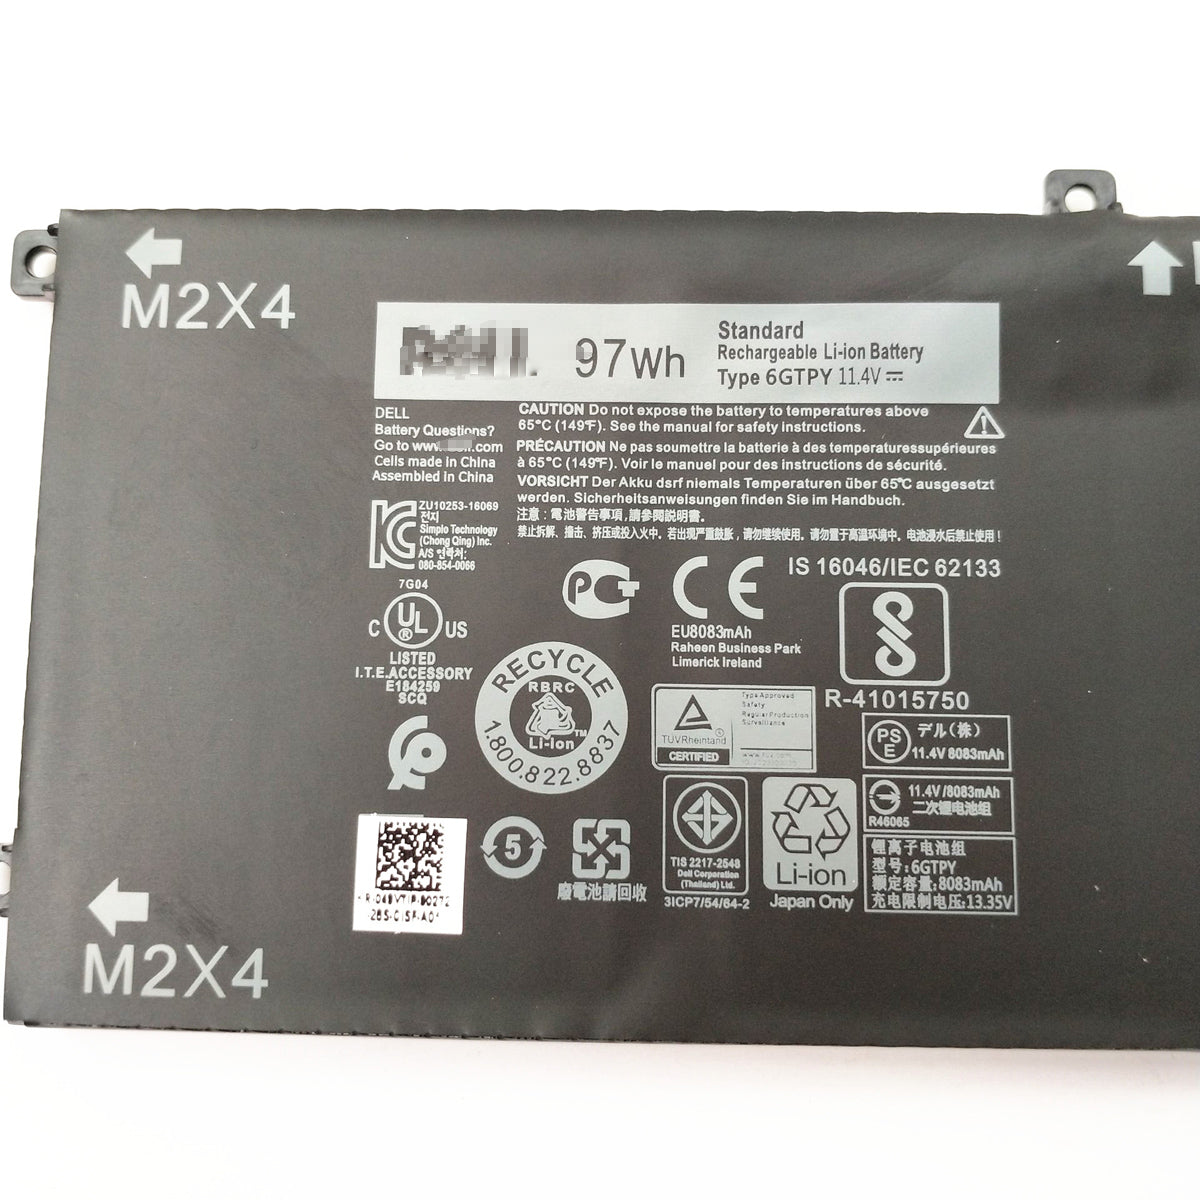 Dell Xps 15 9560 I7 7700hq Xps 15 9560 5xj28 6gtpy 97wh Battery Store Shoppe